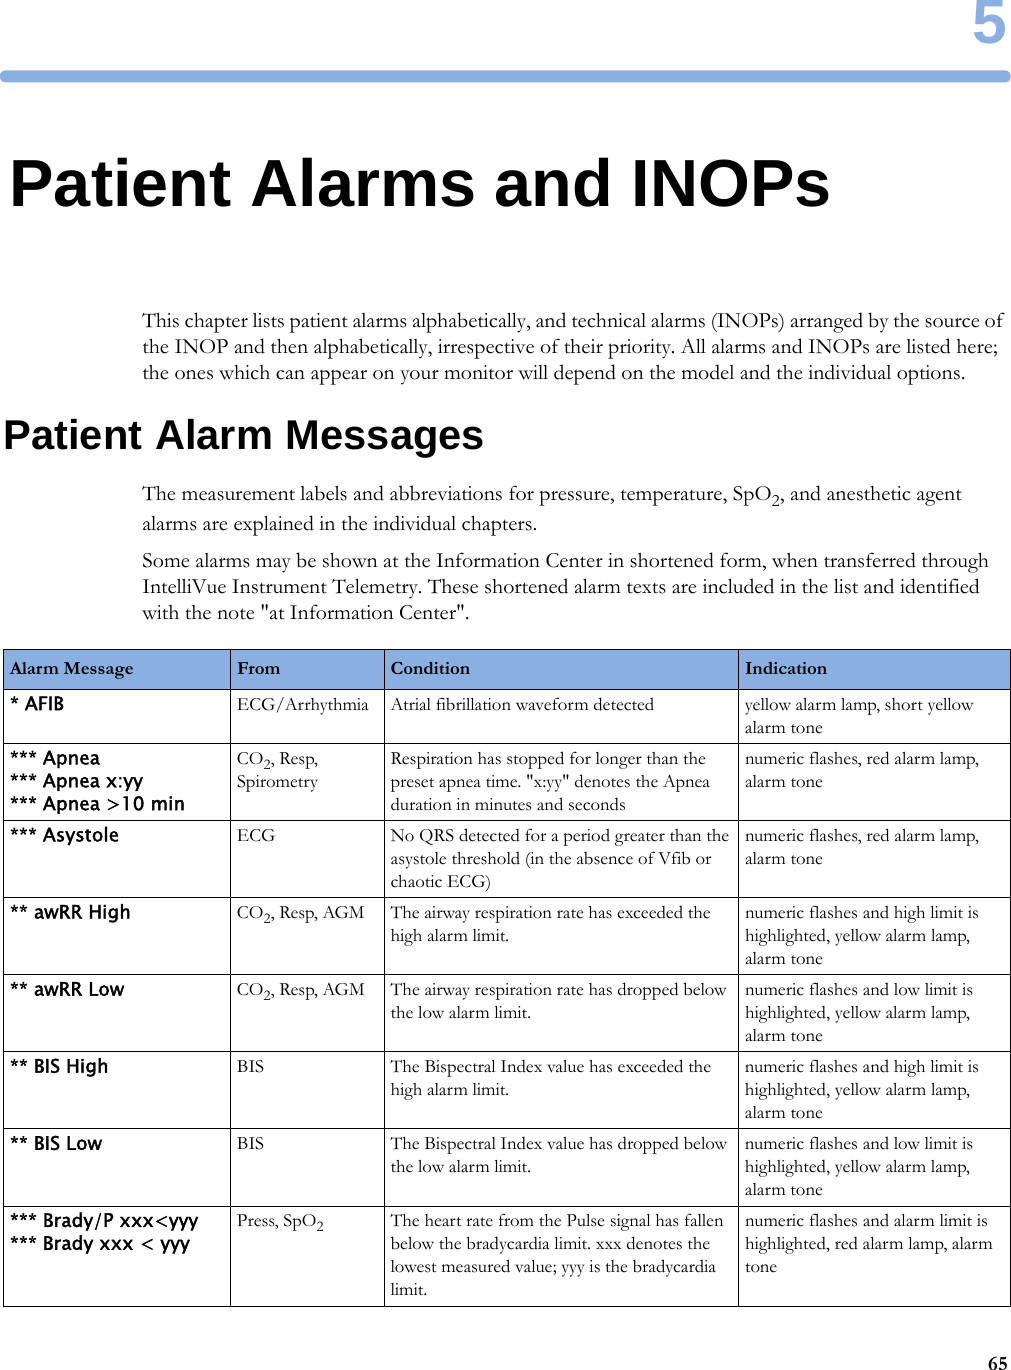 5655Patient Alarms and INOPsThis chapter lists patient alarms alphabetically, and technical alarms (INOPs) arranged by the source of the INOP and then alphabetically, irrespective of their priority. All alarms and INOPs are listed here; the ones which can appear on your monitor will depend on the model and the individual options.Patient Alarm MessagesThe measurement labels and abbreviations for pressure, temperature, SpO2, and anesthetic agent alarms are explained in the individual chapters.Some alarms may be shown at the Information Center in shortened form, when transferred through IntelliVue Instrument Telemetry. These shortened alarm texts are included in the list and identified with the note &quot;at Information Center&quot;.Alarm Message From Condition Indication* AFIB ECG/Arrhythmia Atrial fibrillation waveform detected yellow alarm lamp, short yellow alarm tone*** Apnea*** Apnea x:yy*** Apnea &gt;10 minCO2, Resp, SpirometryRespiration has stopped for longer than the preset apnea time. &quot;x:yy&quot; denotes the Apnea duration in minutes and secondsnumeric flashes, red alarm lamp, alarm tone*** Asystole ECG No QRS detected for a period greater than the asystole threshold (in the absence of Vfib or chaotic ECG)numeric flashes, red alarm lamp, alarm tone** awRR High CO2, Resp, AGM The airway respiration rate has exceeded the high alarm limit.numeric flashes and high limit is highlighted, yellow alarm lamp, alarm tone** awRR Low CO2, Resp, AGM The airway respiration rate has dropped below the low alarm limit.numeric flashes and low limit is highlighted, yellow alarm lamp, alarm tone** BIS High BIS The Bispectral Index value has exceeded the high alarm limit.numeric flashes and high limit is highlighted, yellow alarm lamp, alarm tone** BIS Low BIS The Bispectral Index value has dropped below the low alarm limit.numeric flashes and low limit is highlighted, yellow alarm lamp, alarm tone*** Brady/P xxx&lt;yyy*** Brady xxx &lt; yyyPress, SpO2The heart rate from the Pulse signal has fallen below the bradycardia limit. xxx denotes the lowest measured value; yyy is the bradycardia limit.numeric flashes and alarm limit is highlighted, red alarm lamp, alarm tone